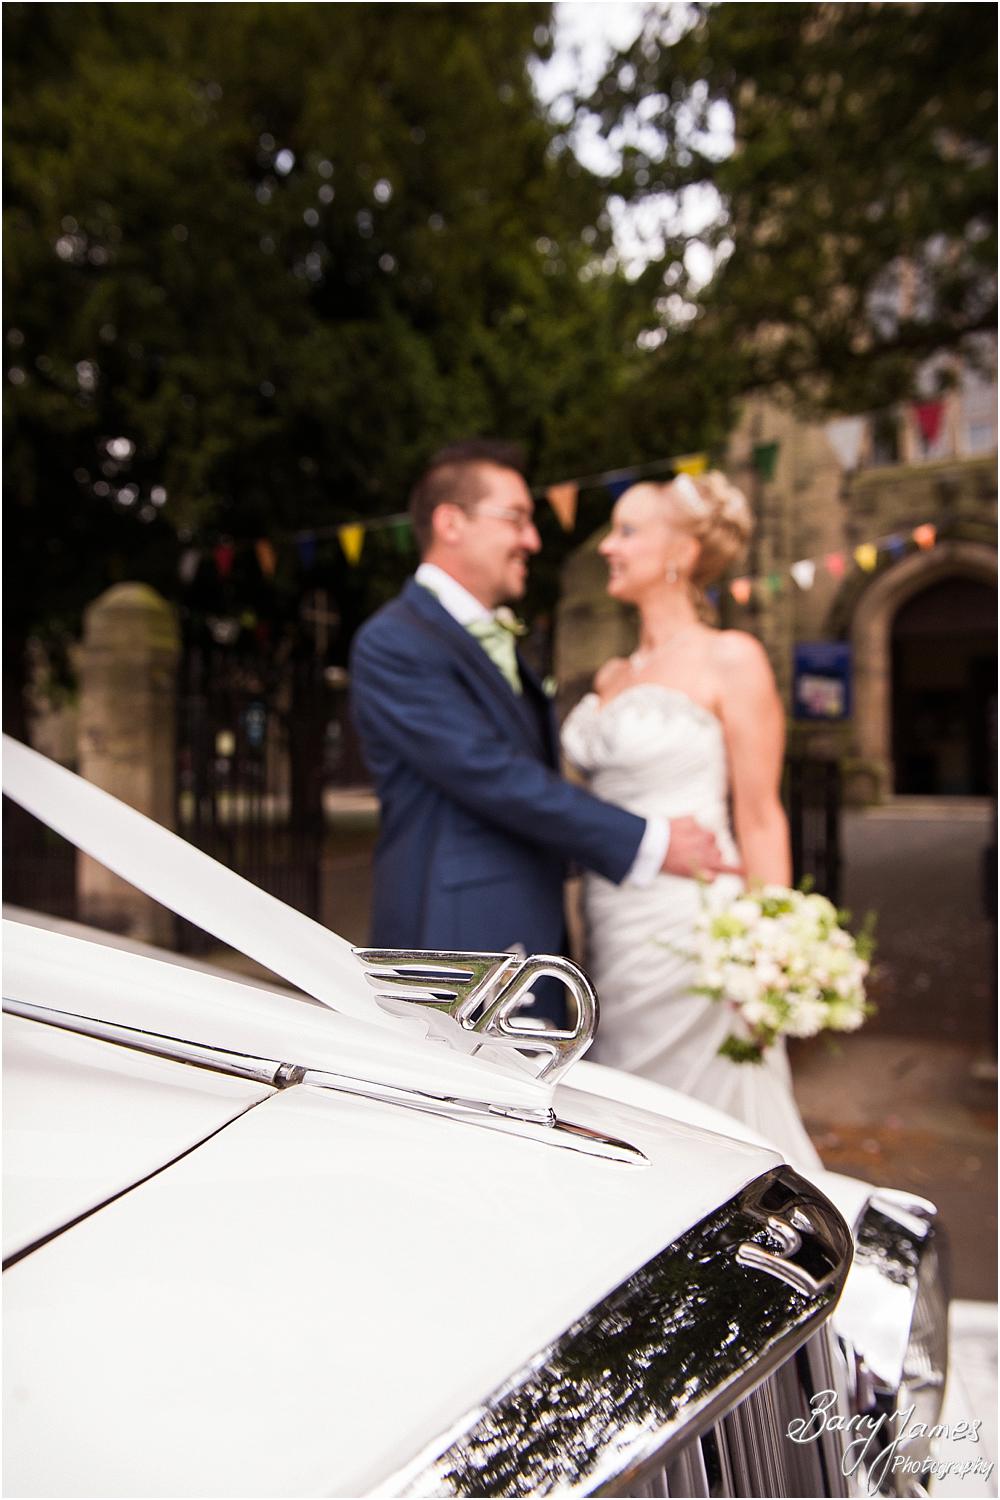 Perfect wedding car transport from Platinum Cars at St Augustines in Rugeley by Rugeley Wedding Photographers Barry James